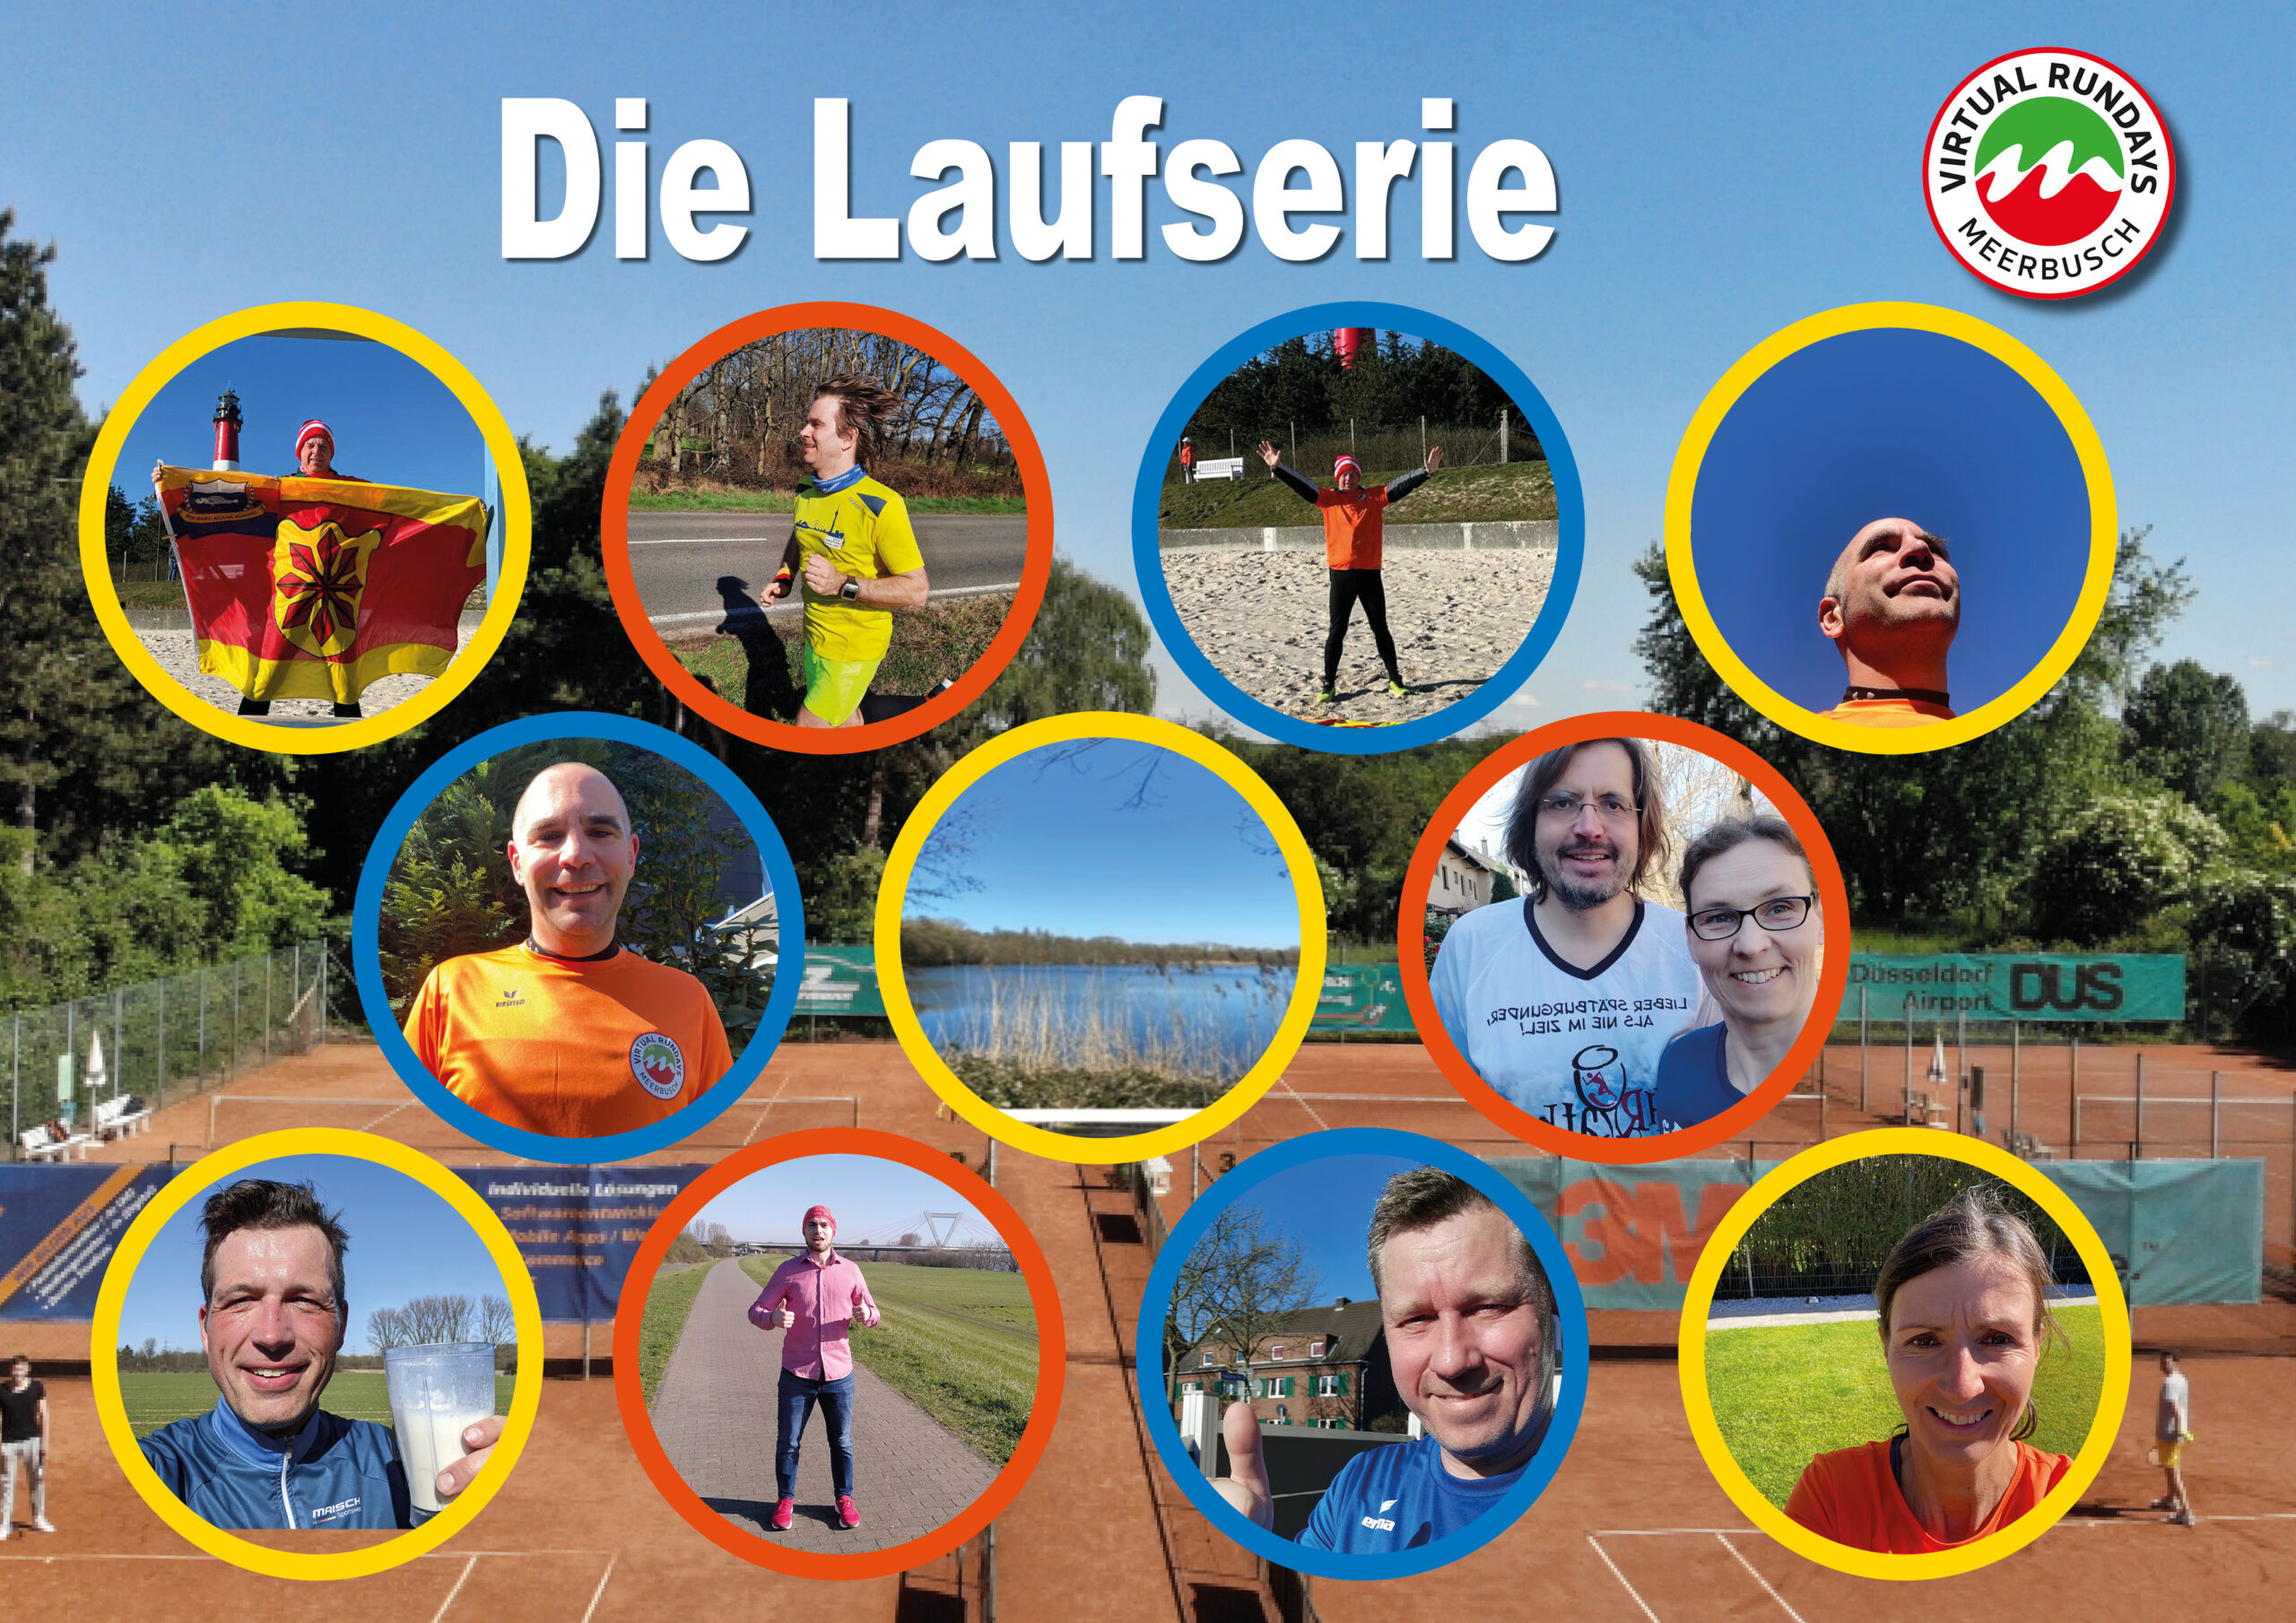 Laufserie 2 Photo Wall3